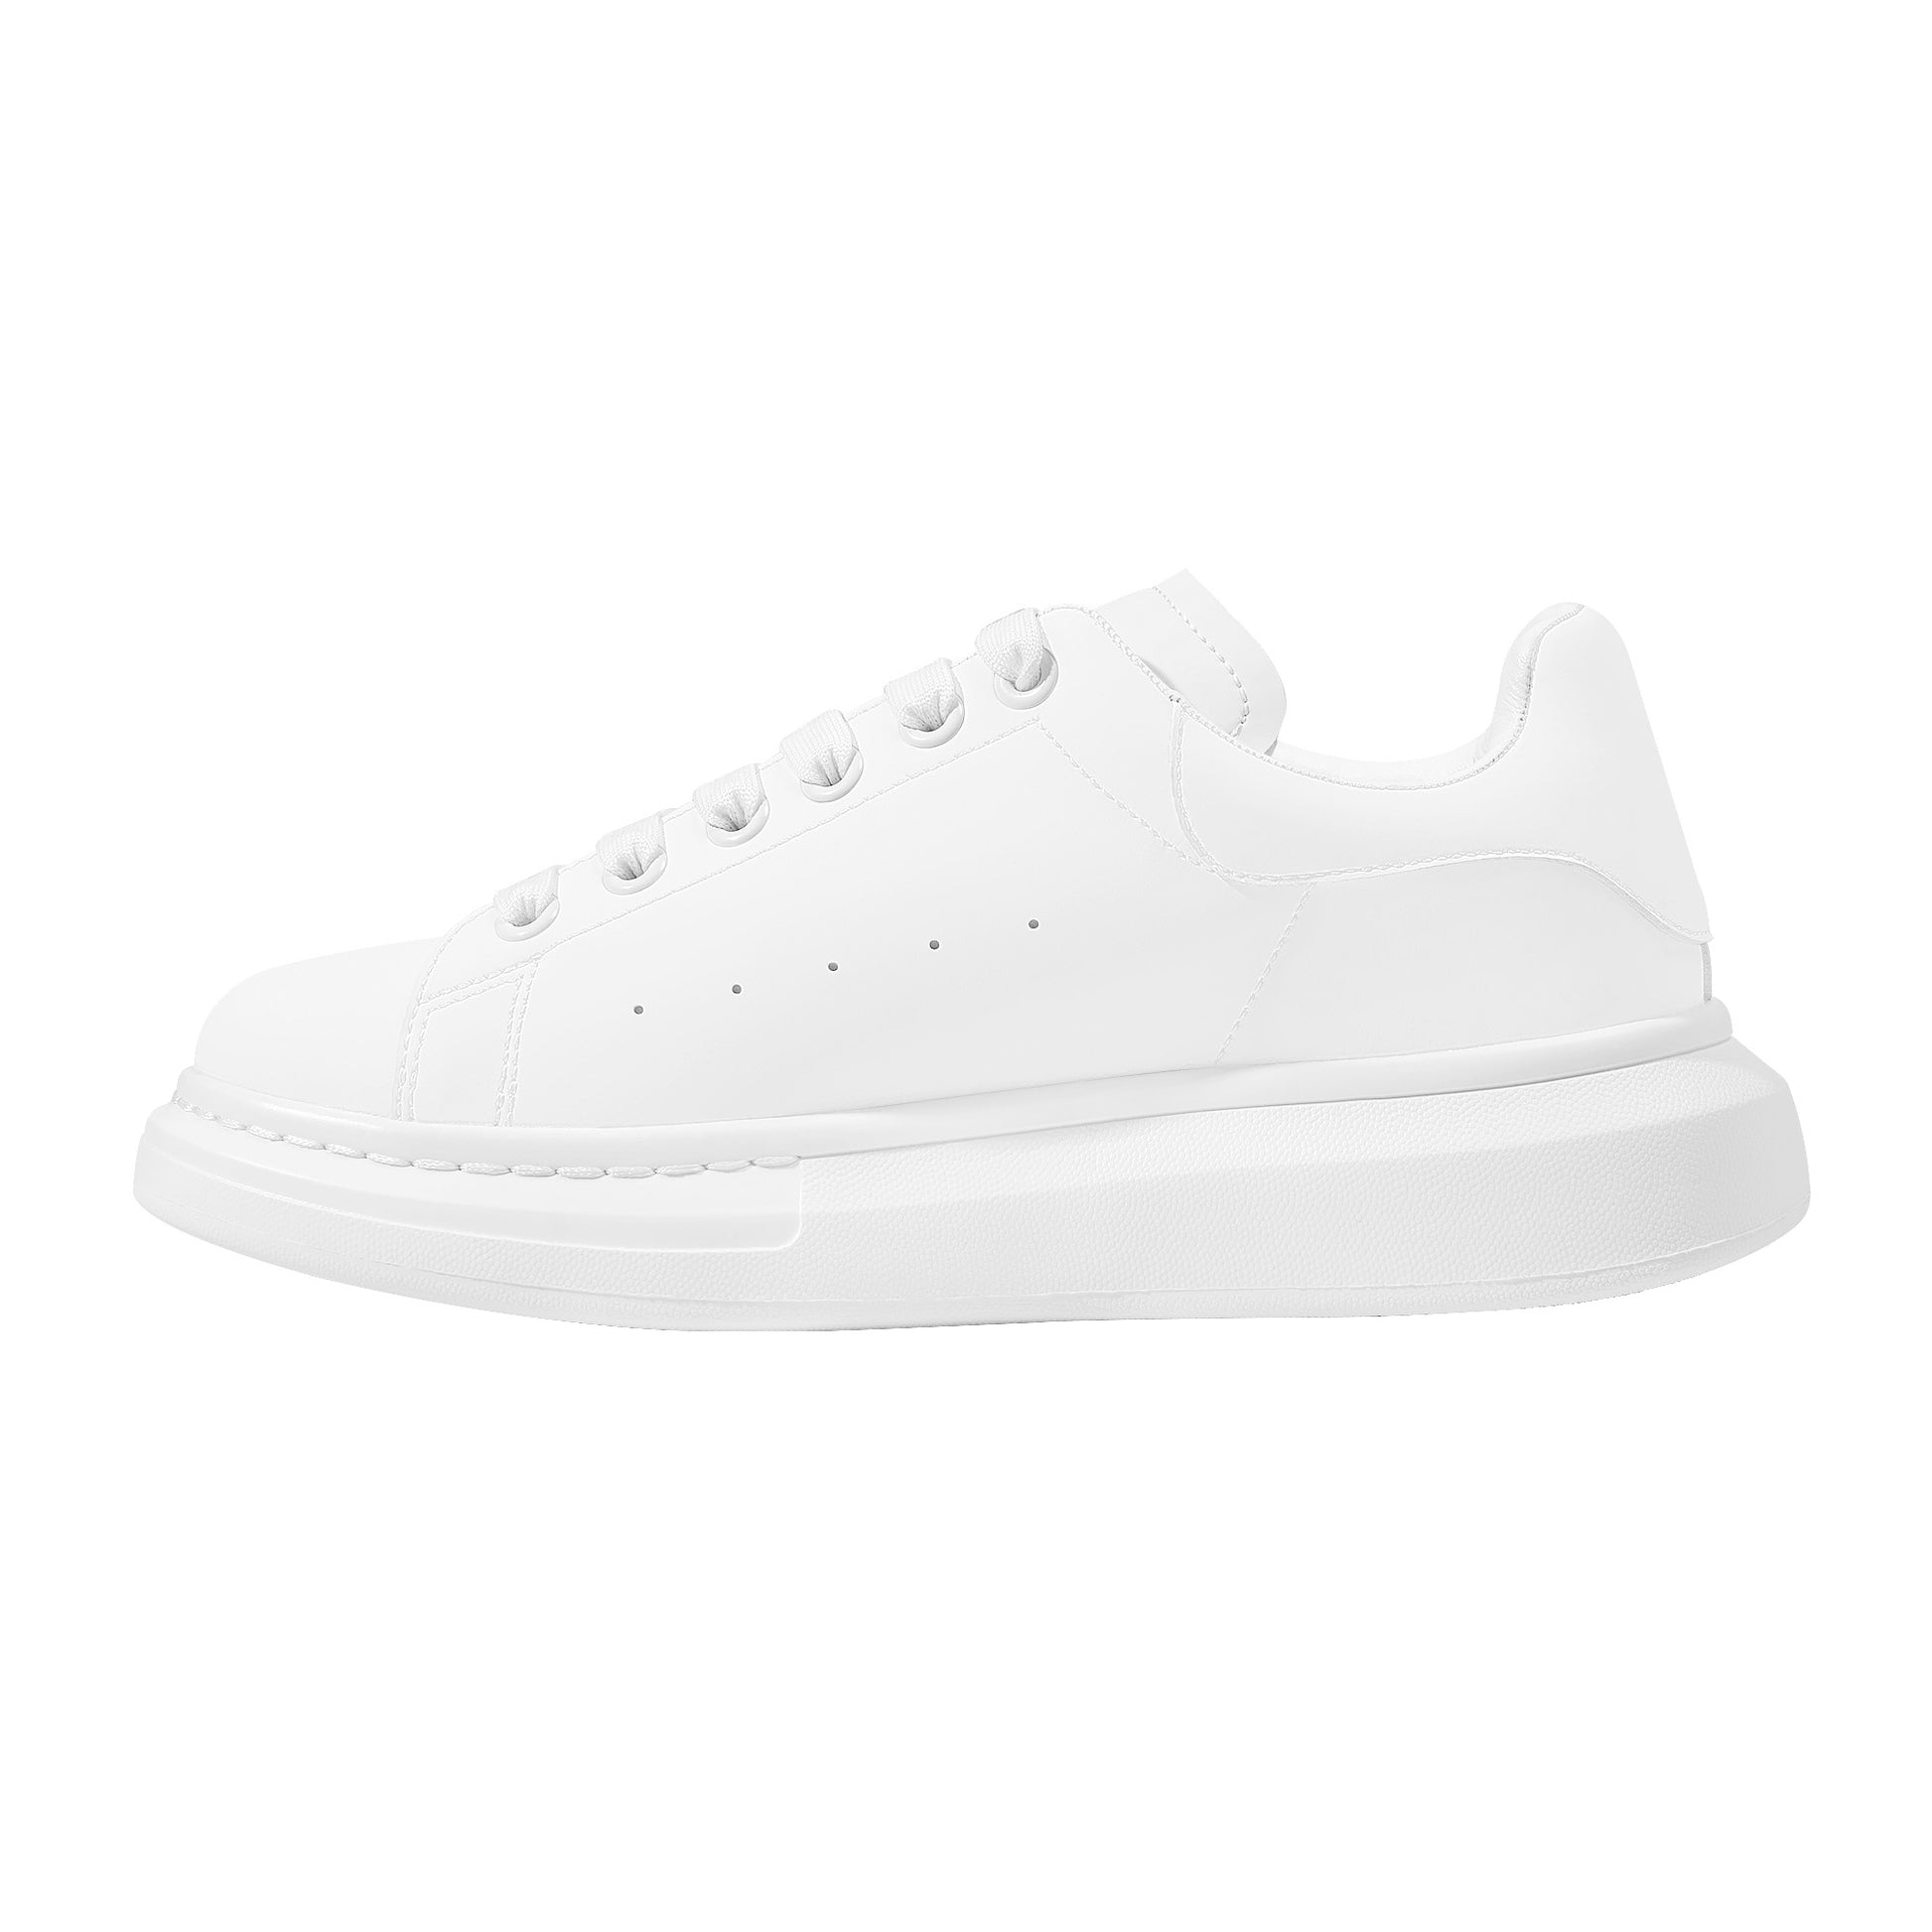 Create Your Own - Platform Low Top Shoes - White - HayGoodies - shoes